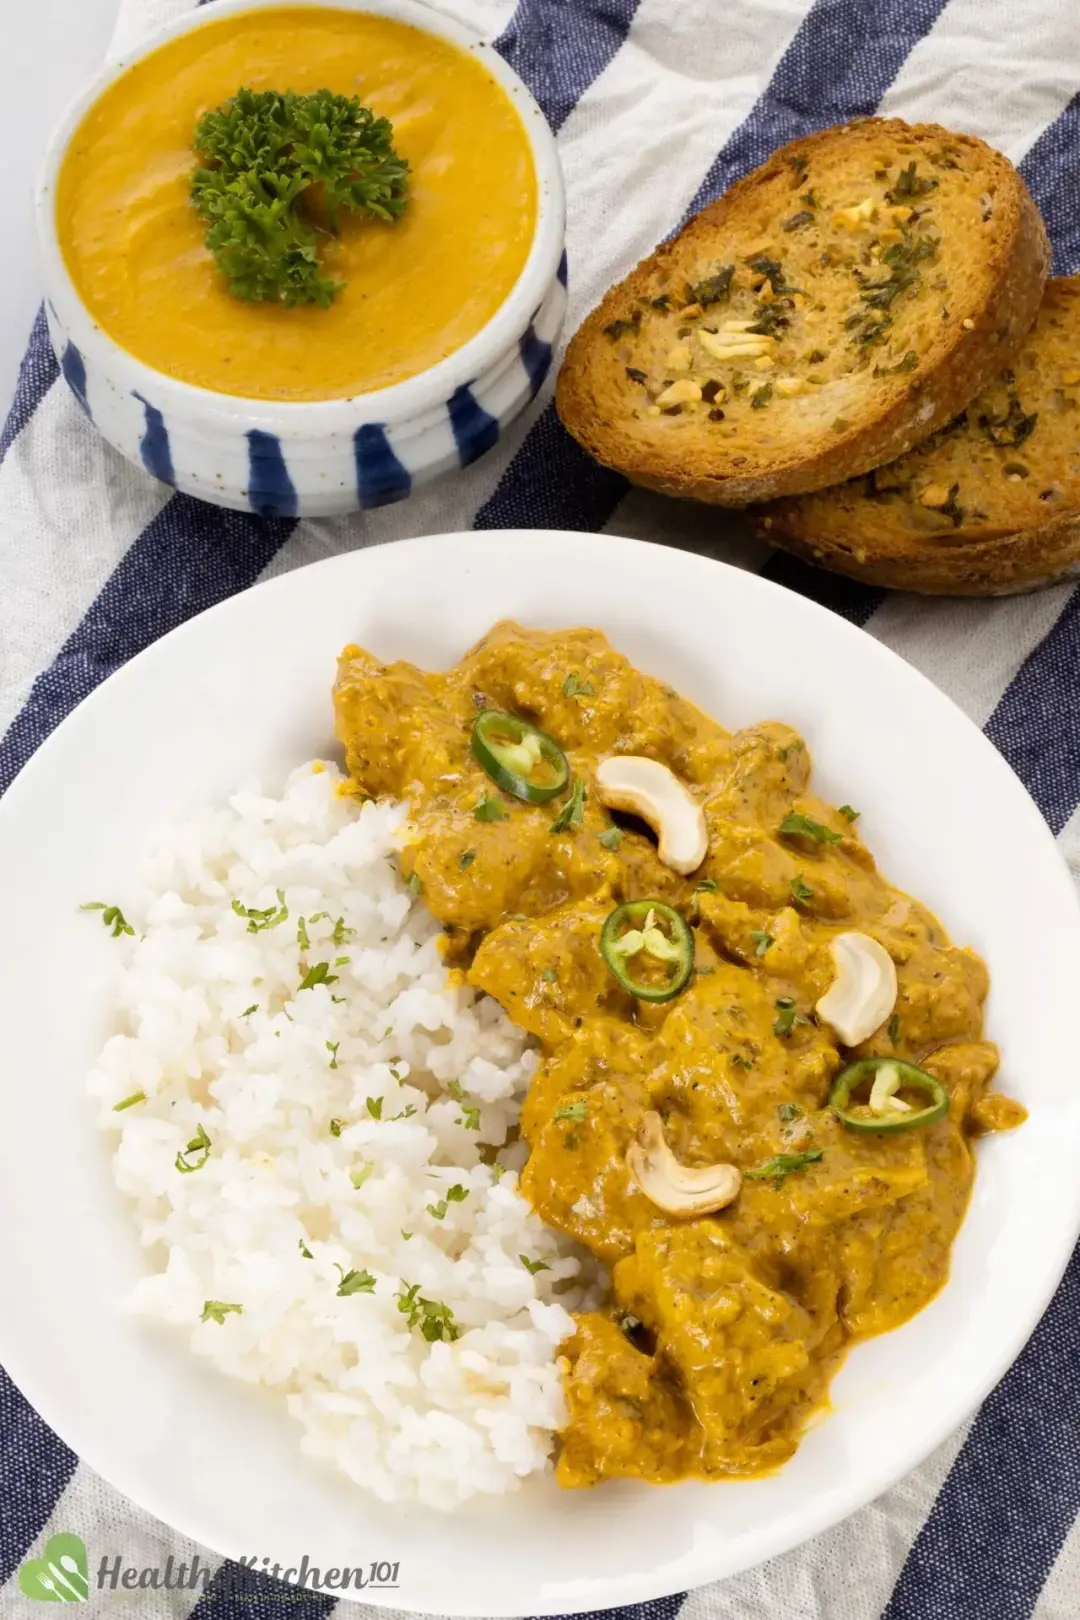 A chicken korma and rice plate next to garlic bread and pumpkin soup topped with parsley